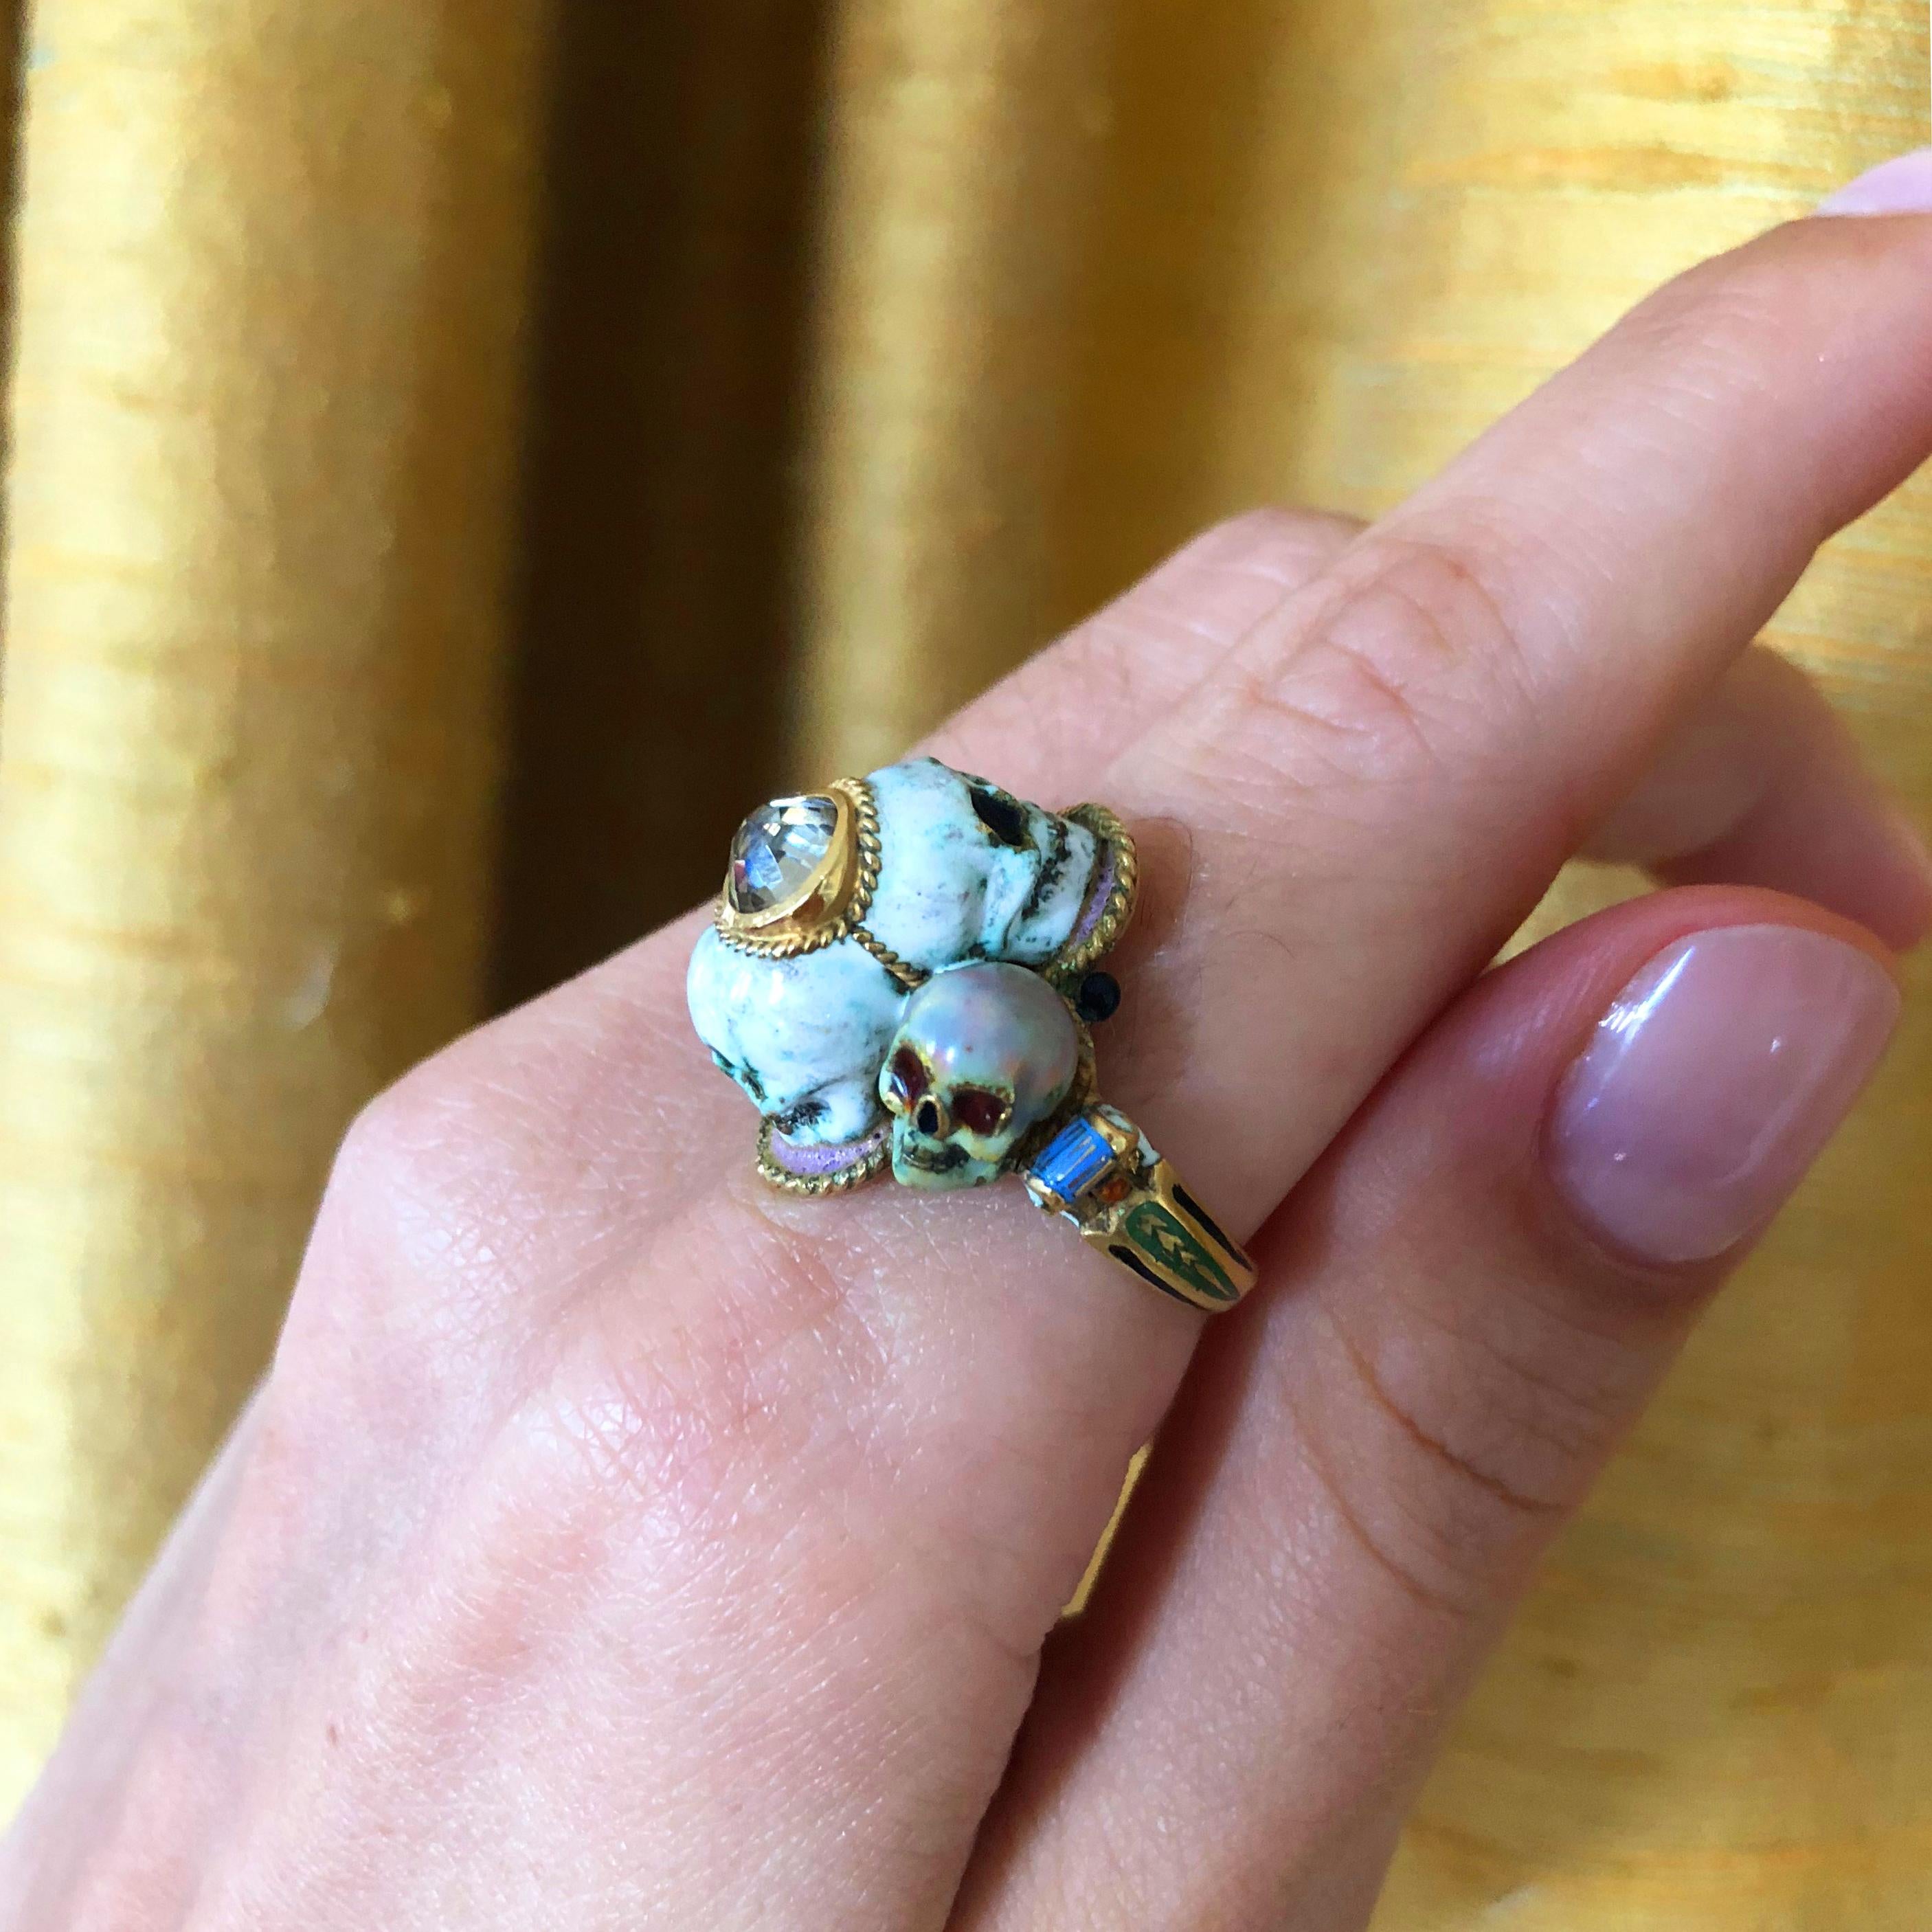 A diamond, enamel, and 18 karat gold skull ring, by Venice-based house of Codognato, 1980s. This ring is a size 9. It is signed Codognato Venezia and stamped 18k - and part of the jeweler's famed skull collections.